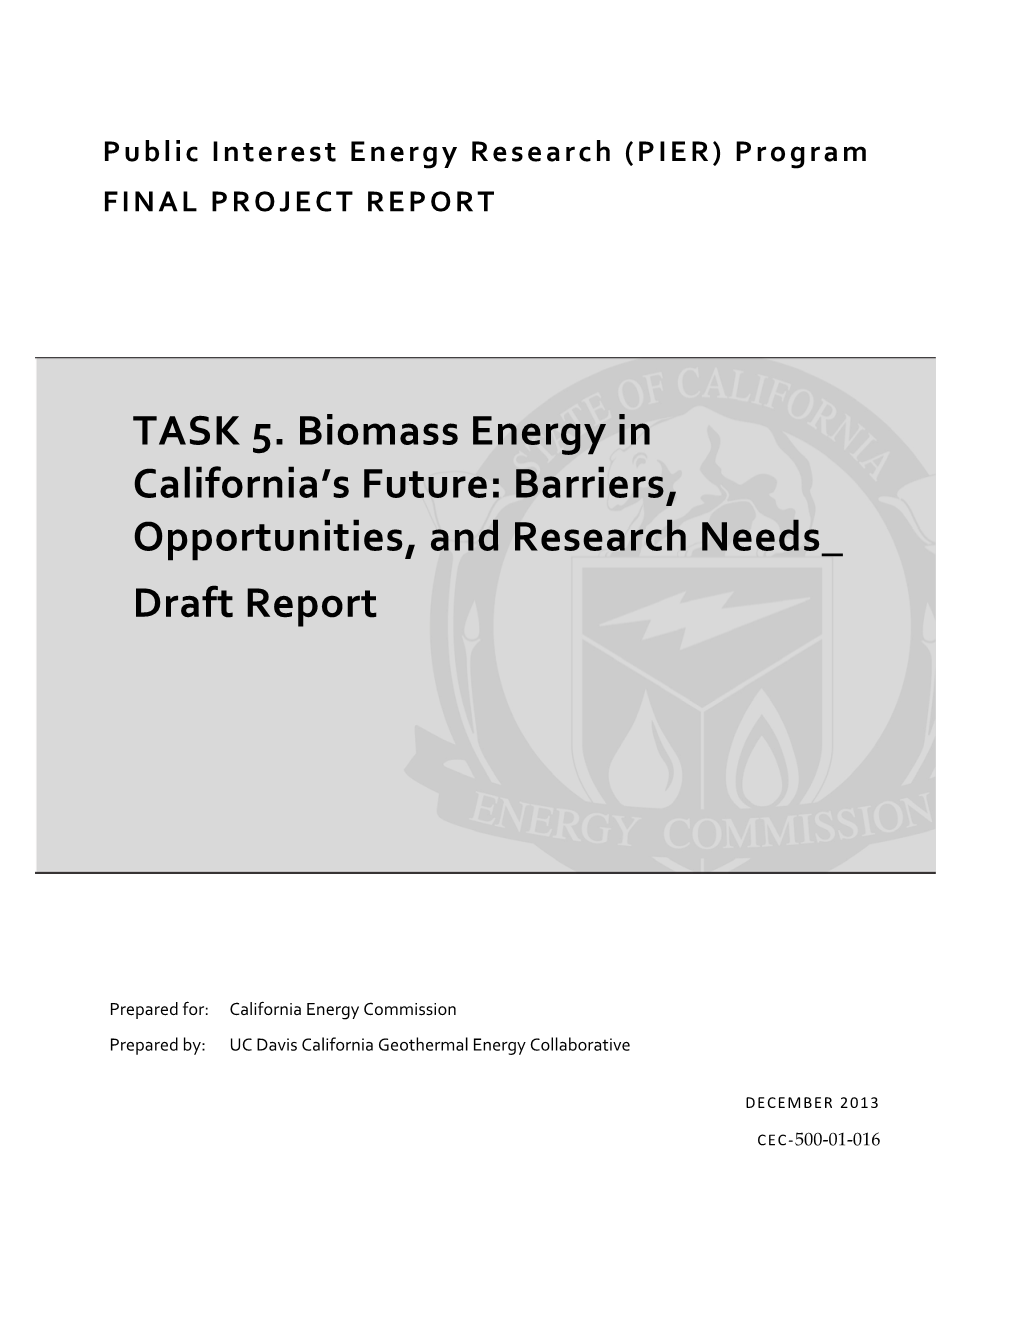 Barriers, Opportunities, and Research Needs Draft Report